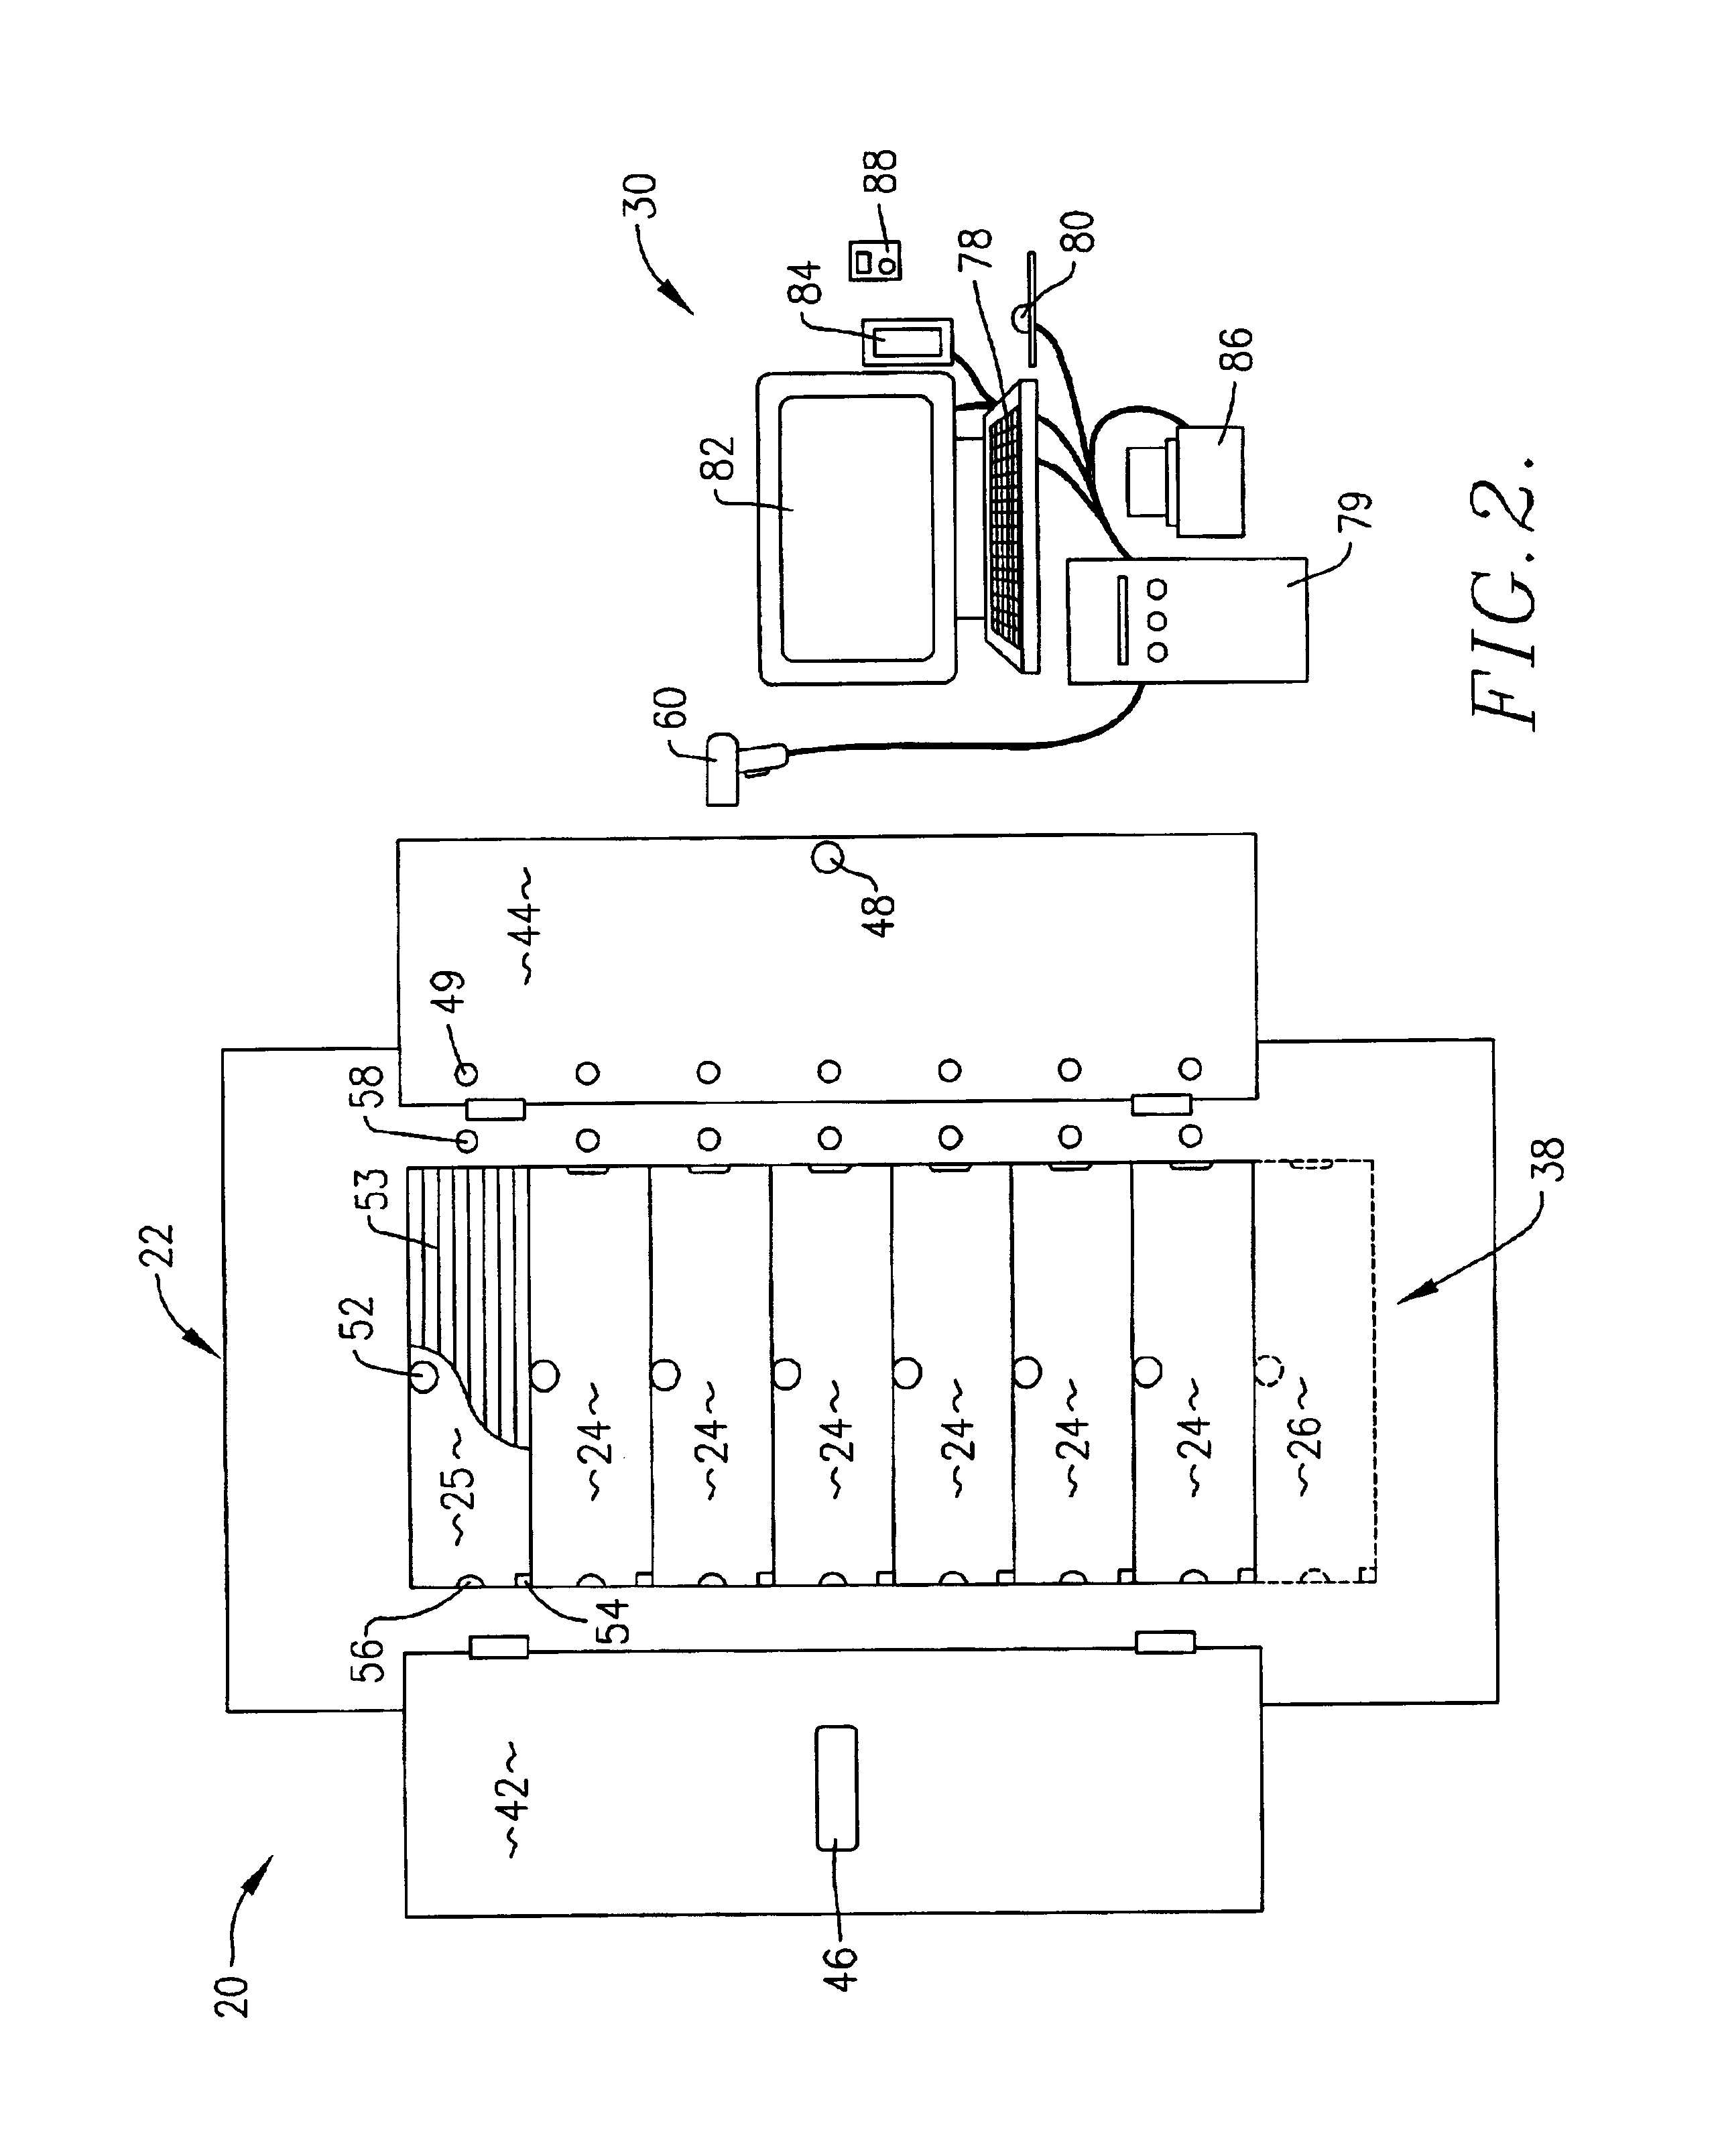 System, method, and computer program for managing storage and distribution of money tills